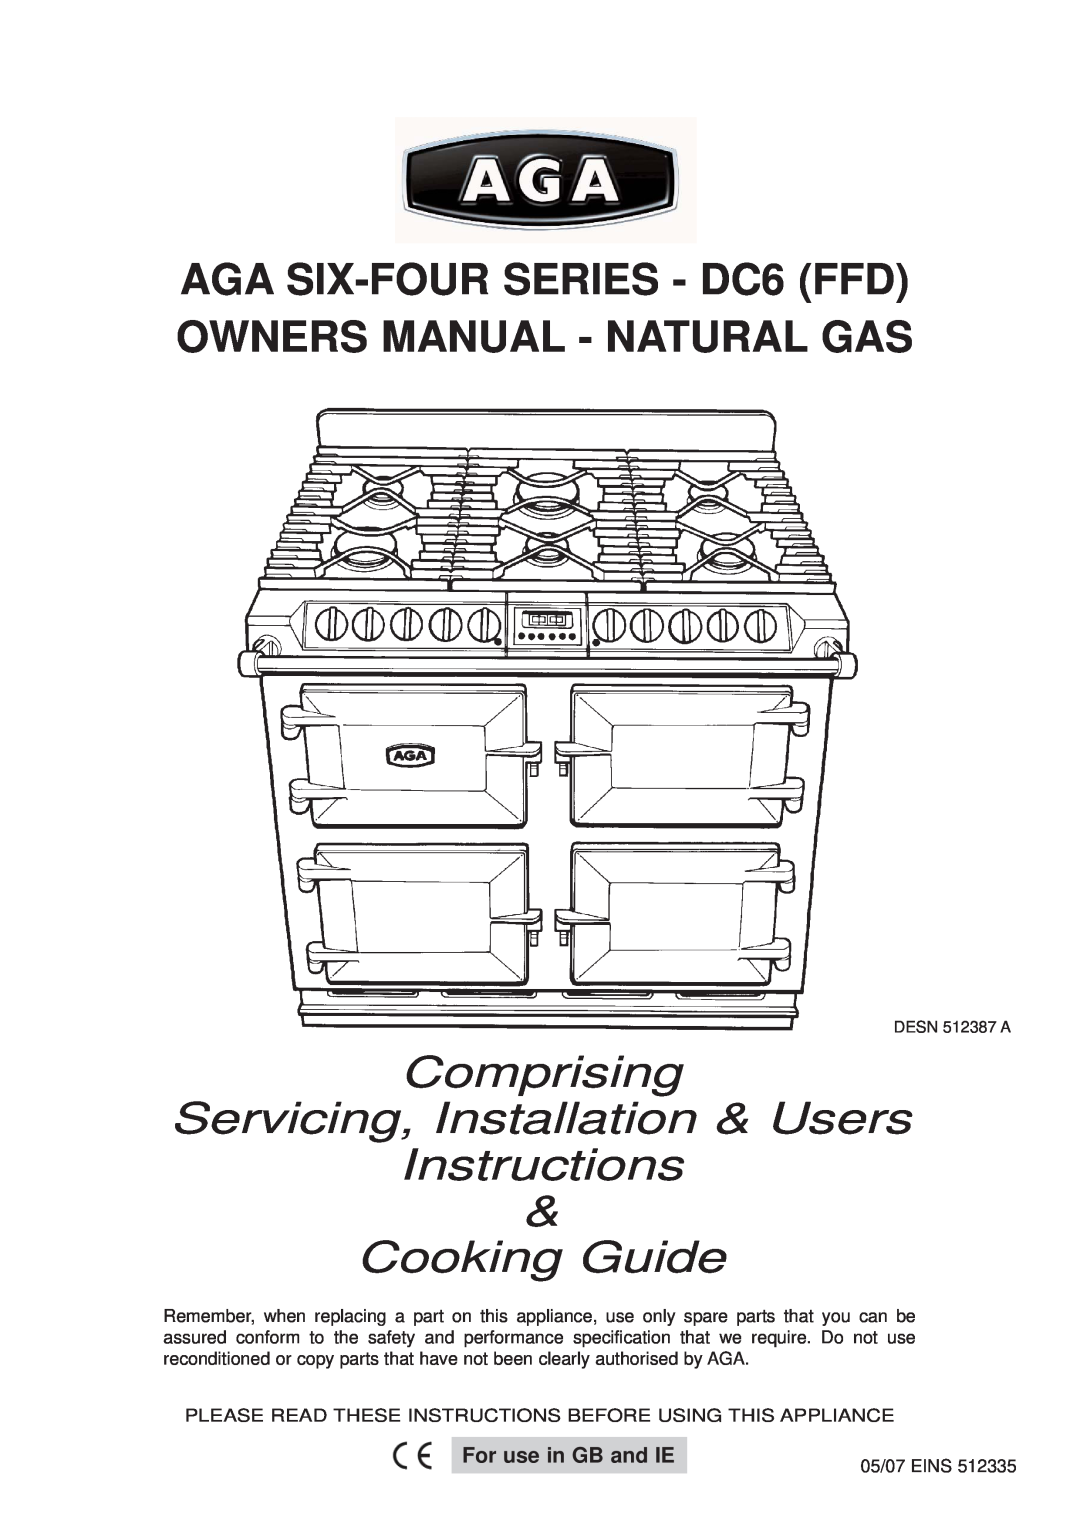 Aga Ranges dc6 owner manual AGA SIX-FOUR SERIES - DC6 FFD OWNERS MANUAL - NATURAL GAS, Cooking Guide, For use in GB and IE 